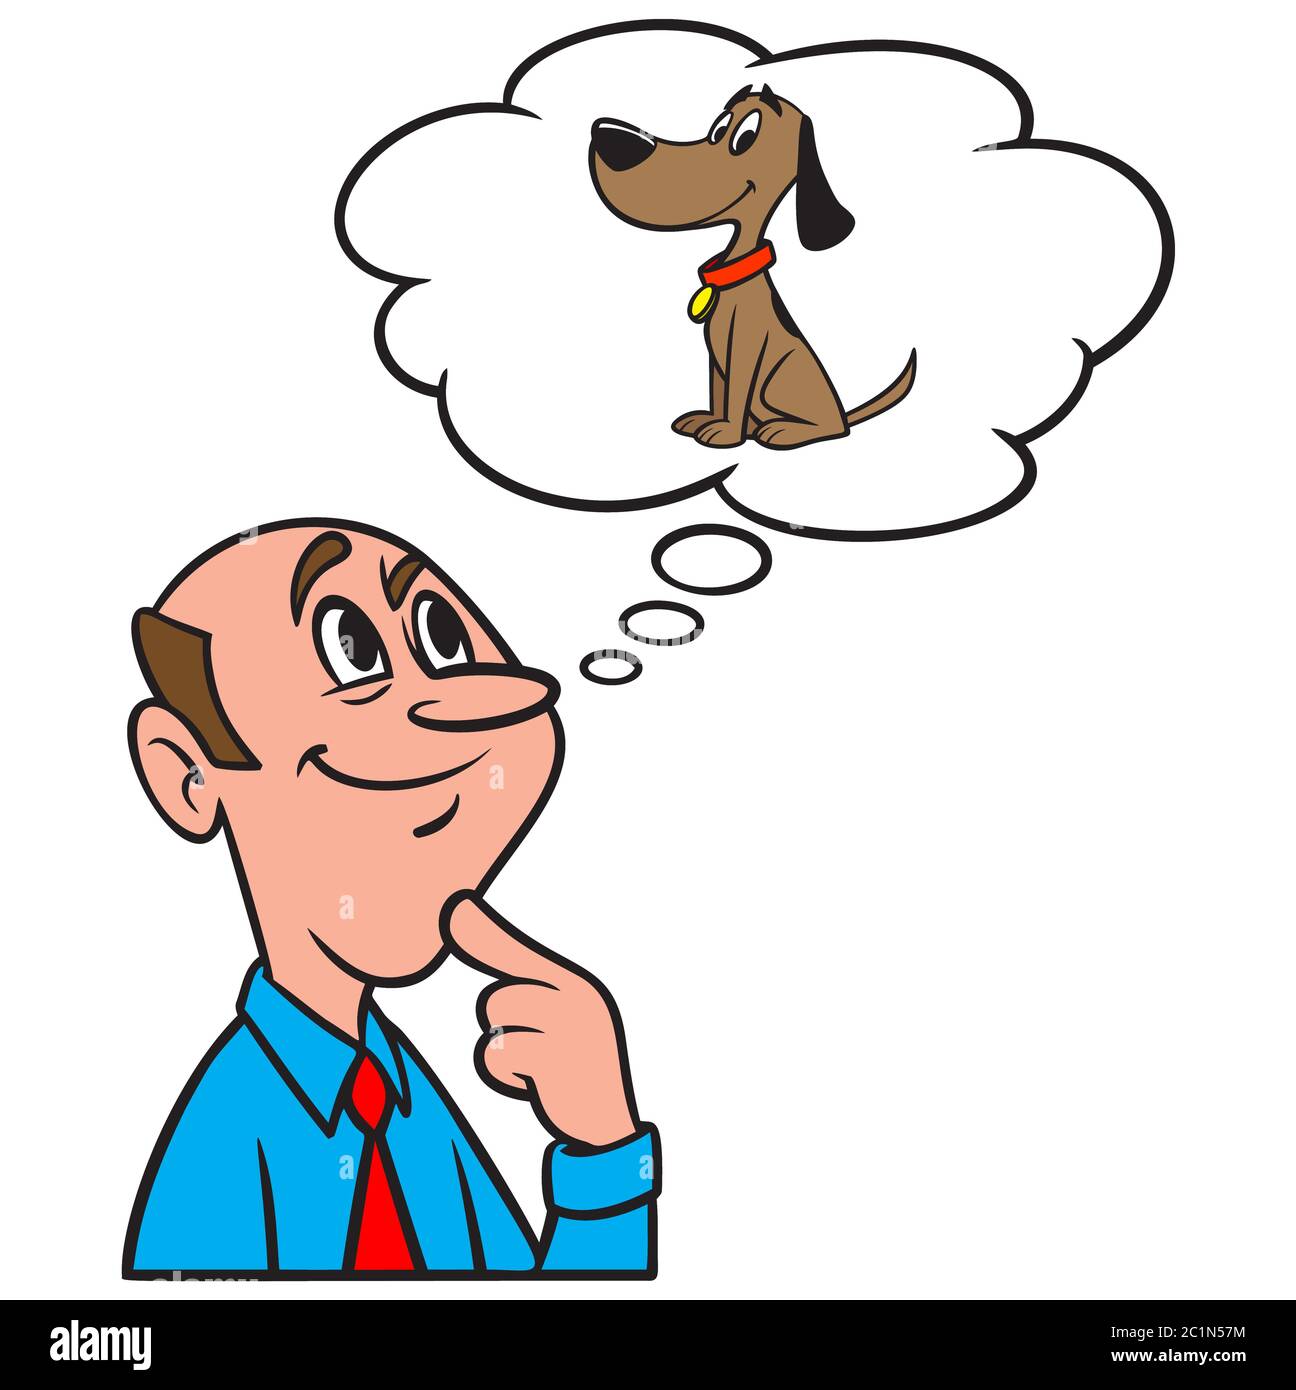 Thinking About A Dog- An Illustration of a person Thinking About a Dog. Stock Vector